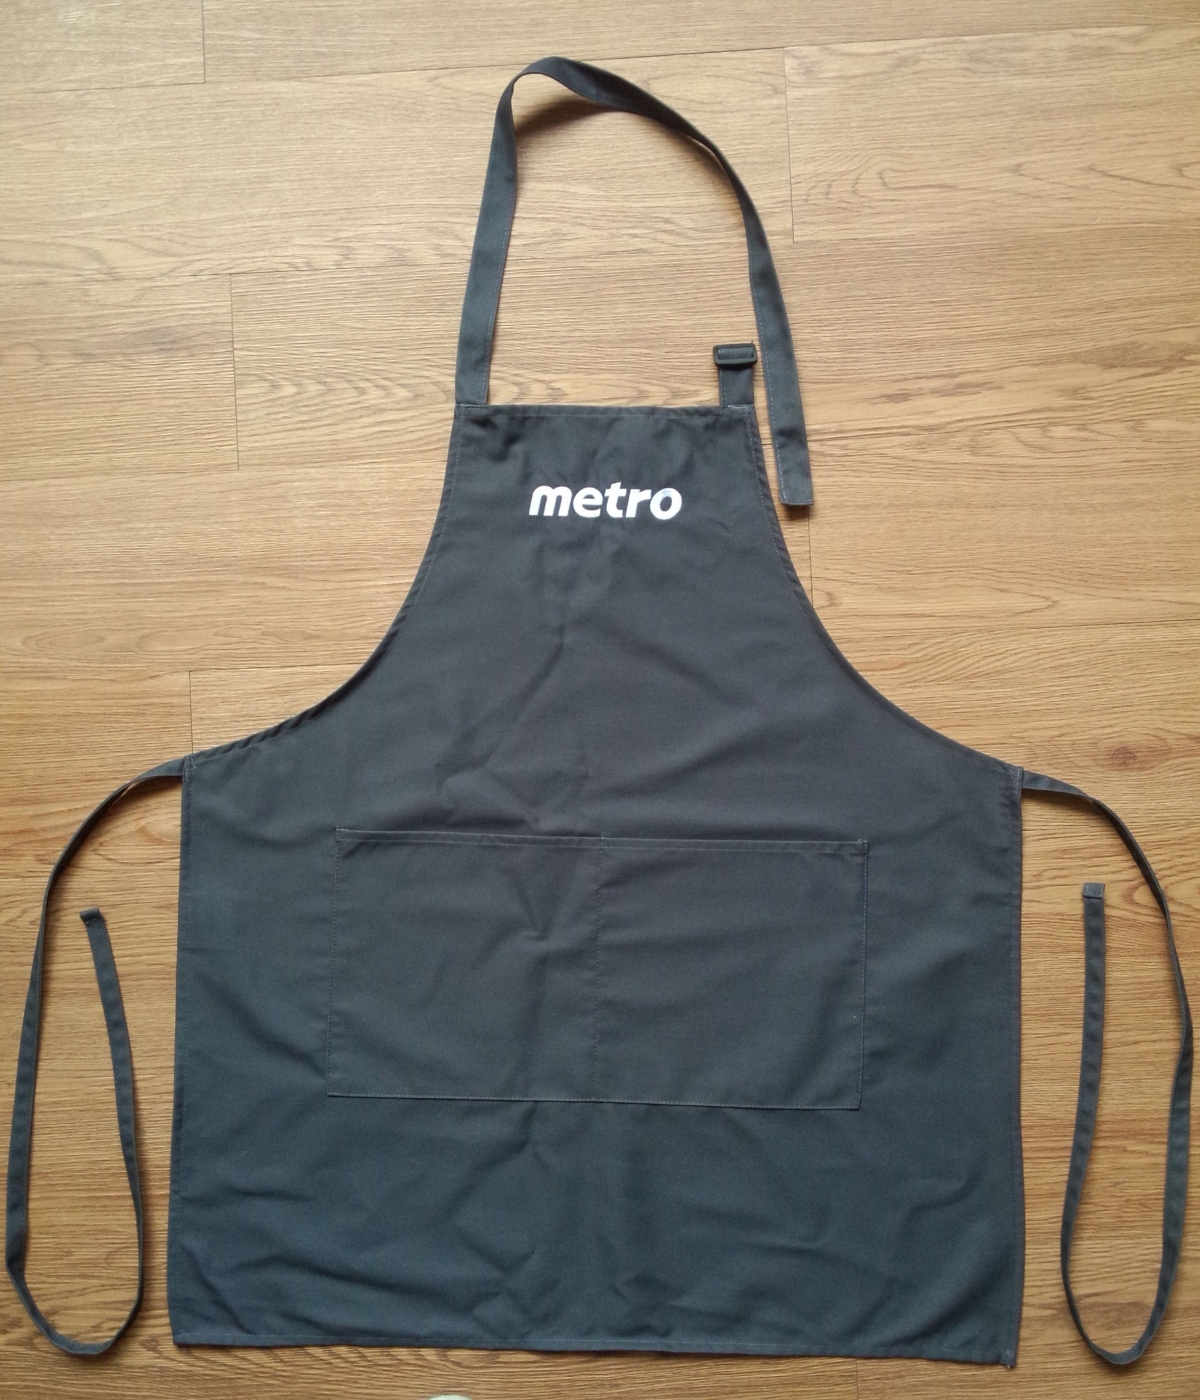 Successful cases throughout the years & counting ……-EAPRON- Apron, Oven mitt, Pot holder, Tea towel, Table cloth